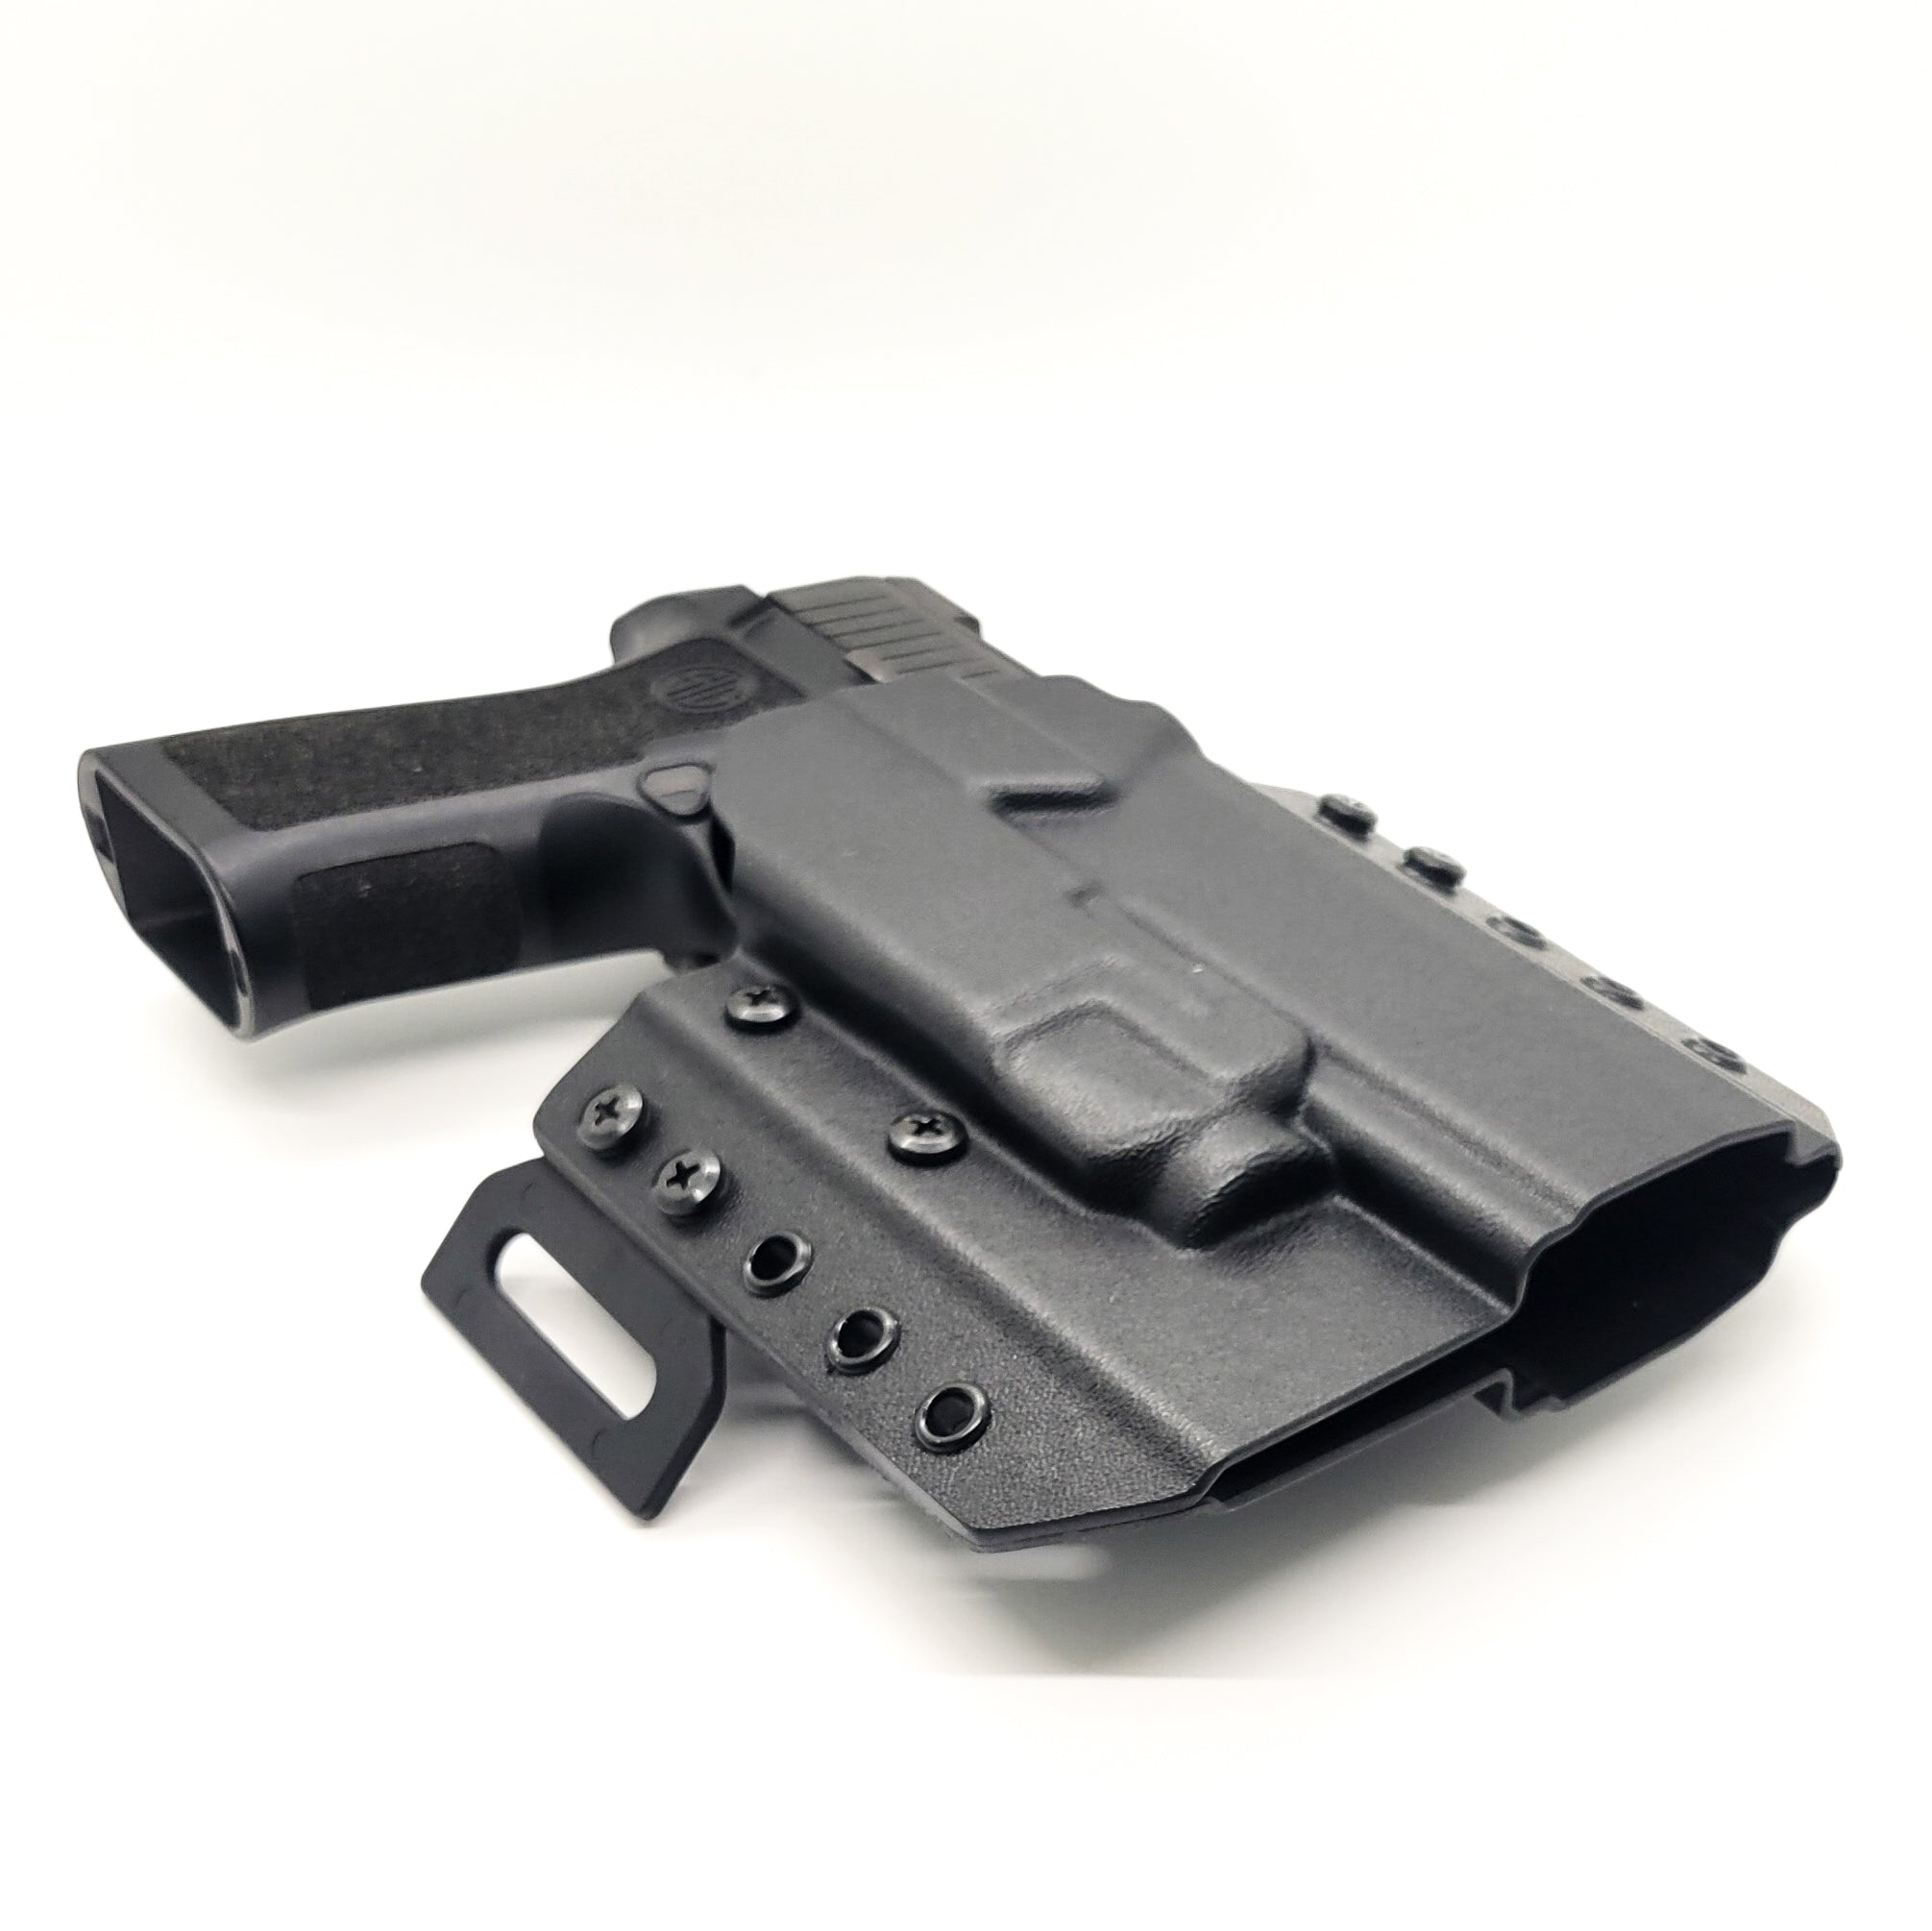 Outside Waistband Pancake Style Kydex holster designed to fit the Sig Sauer P320 Full Size, X5 Legion & M17 with the Streamlight TLR-7 or TLR-7A.  Full sweat guard, adjustable retention, open muzzle cleared for a red dot sight. Proudly made in the USA for veterans & law enforcement. TLR7 TLR7A P 320 X-Five X 5 